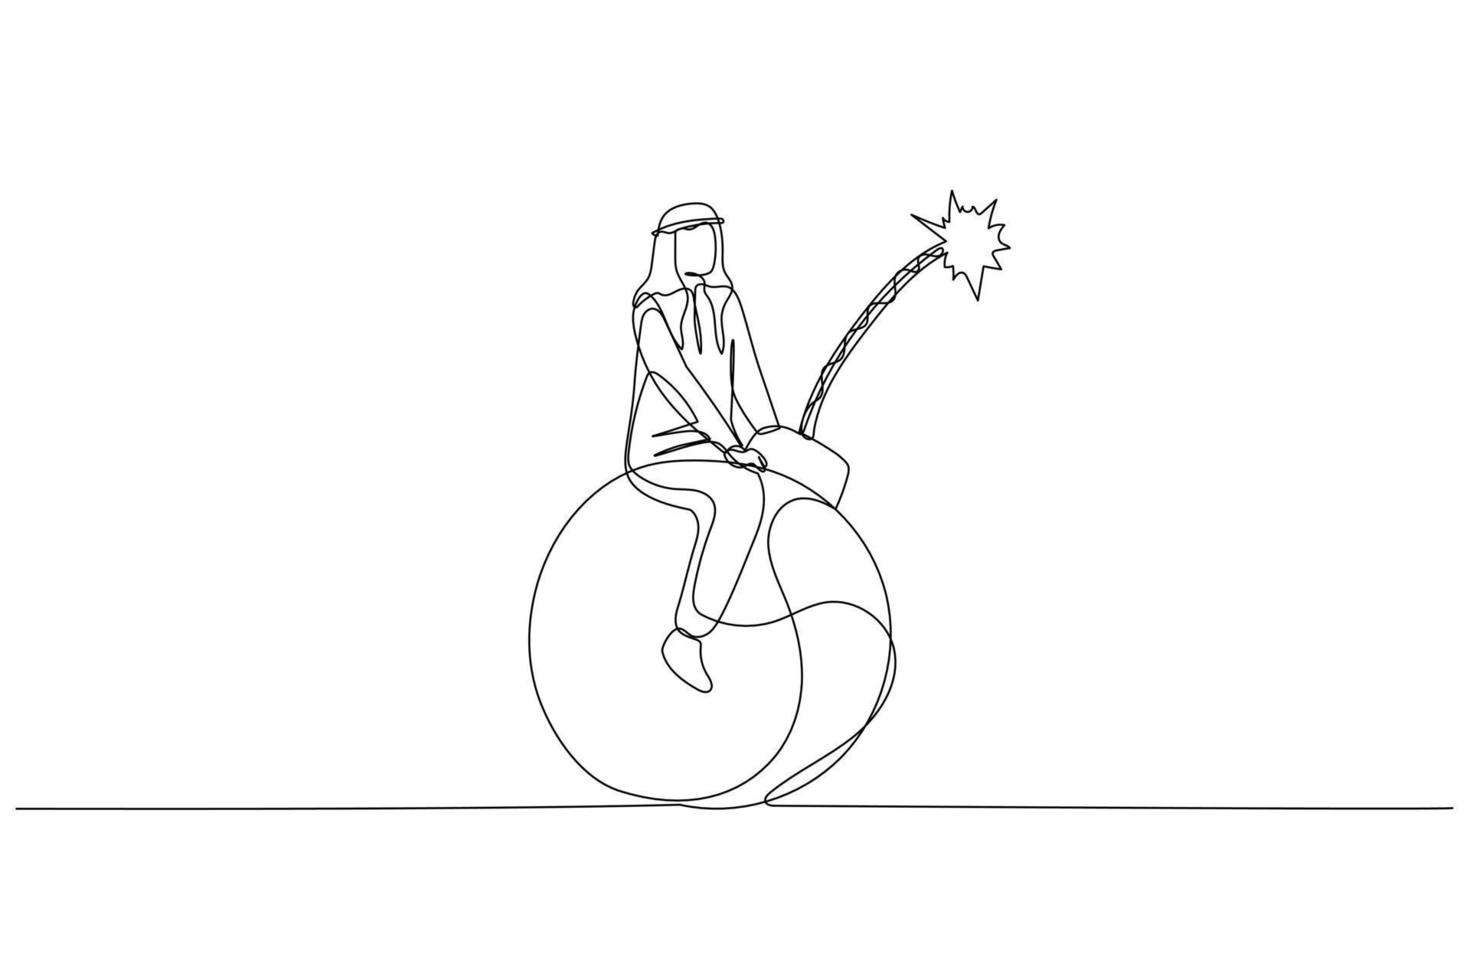 Drawing of arab businessman riding round object that can explode. metaphor for risk. Single line art style vector